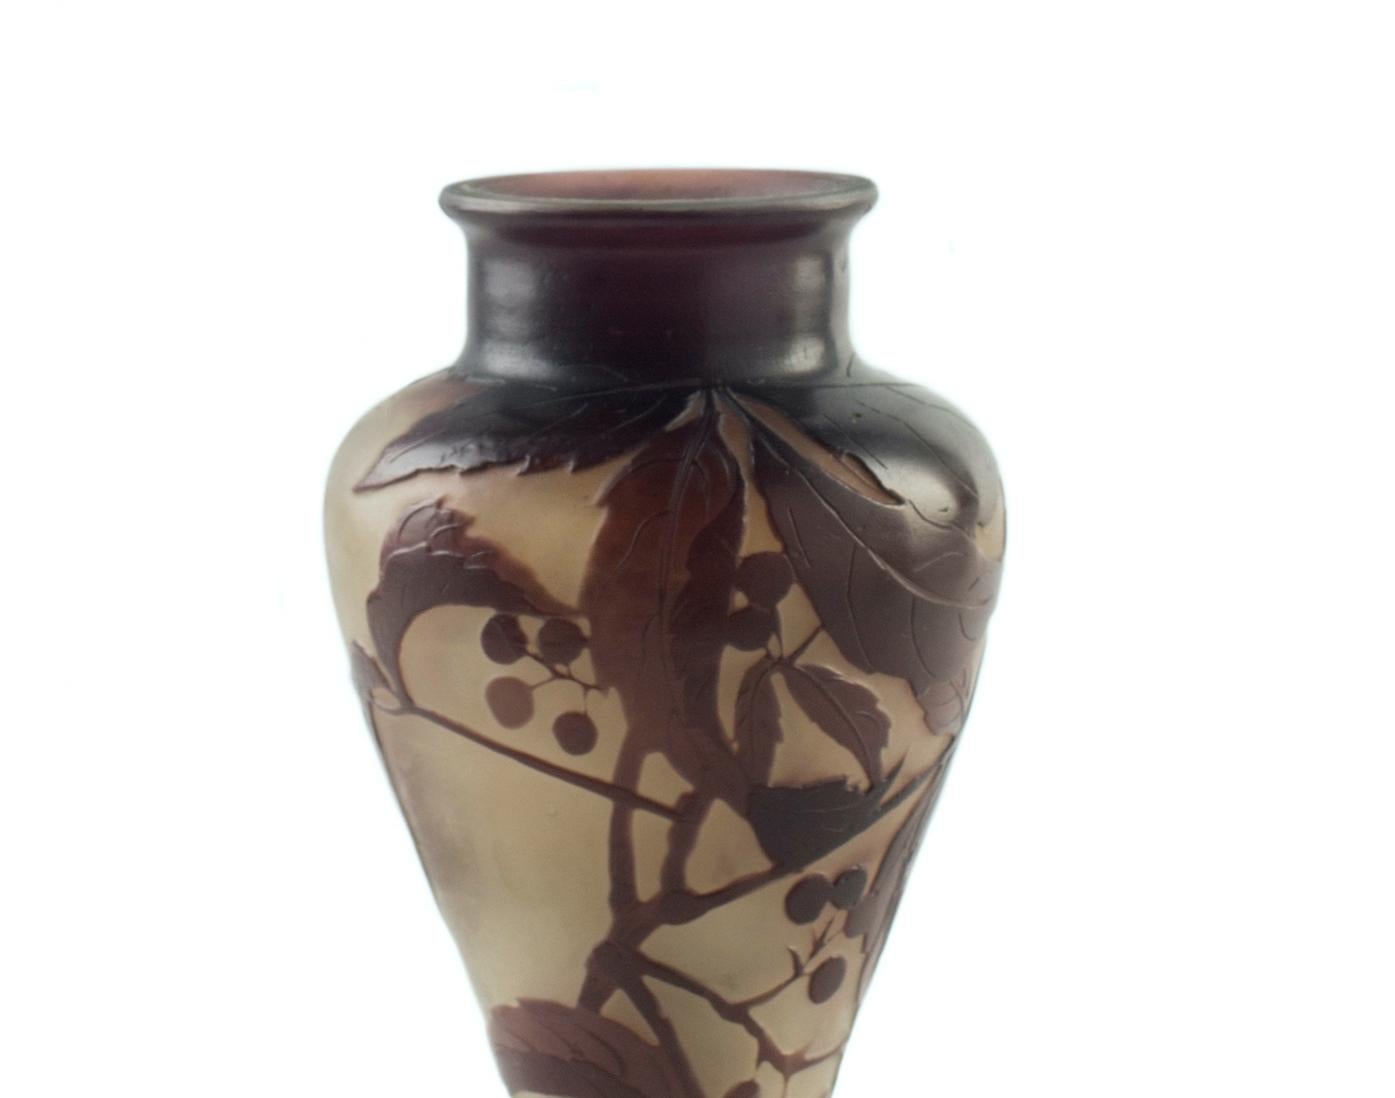 This Gallé purple vase is an original decorative object realized between 1920 and 1925 by Emile Gallé. 

Original blown purple glass.

Very good conditions.

Vase in vitreous paste engraved with the stem acid in relief with globular upward